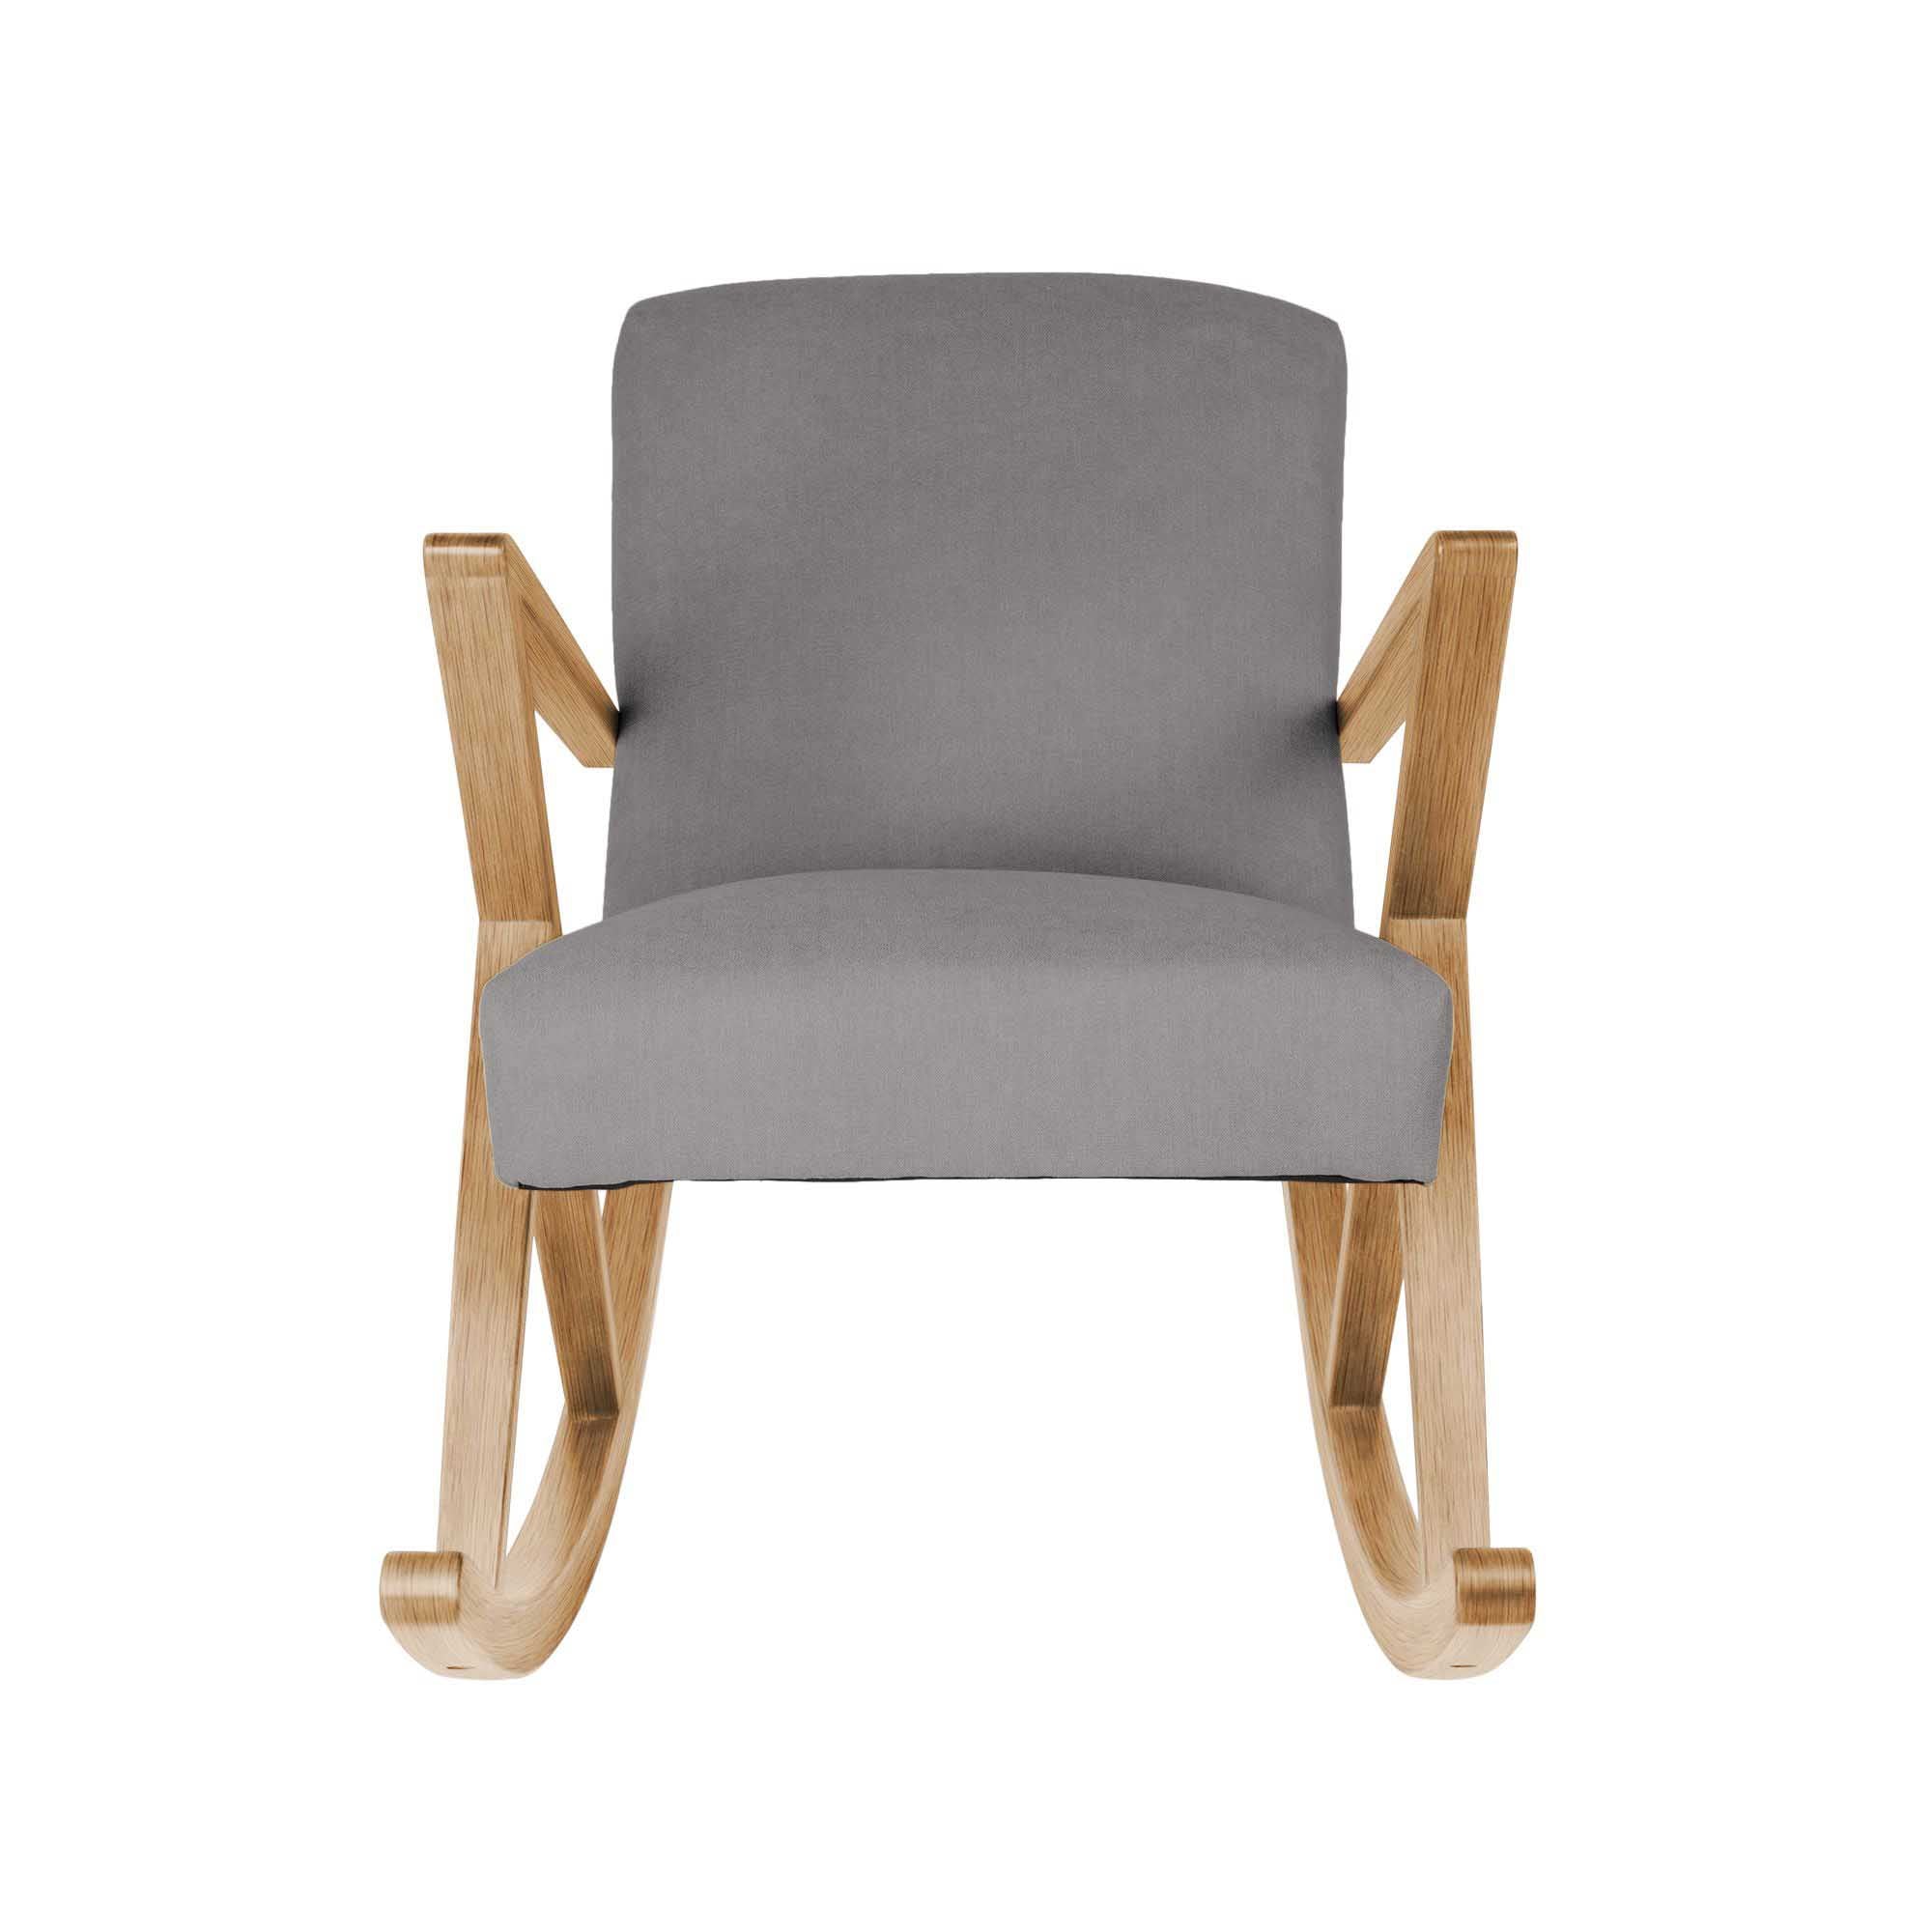 Rocking Chair, Oak Wood Frame, Natural Colour grey fabric, front view